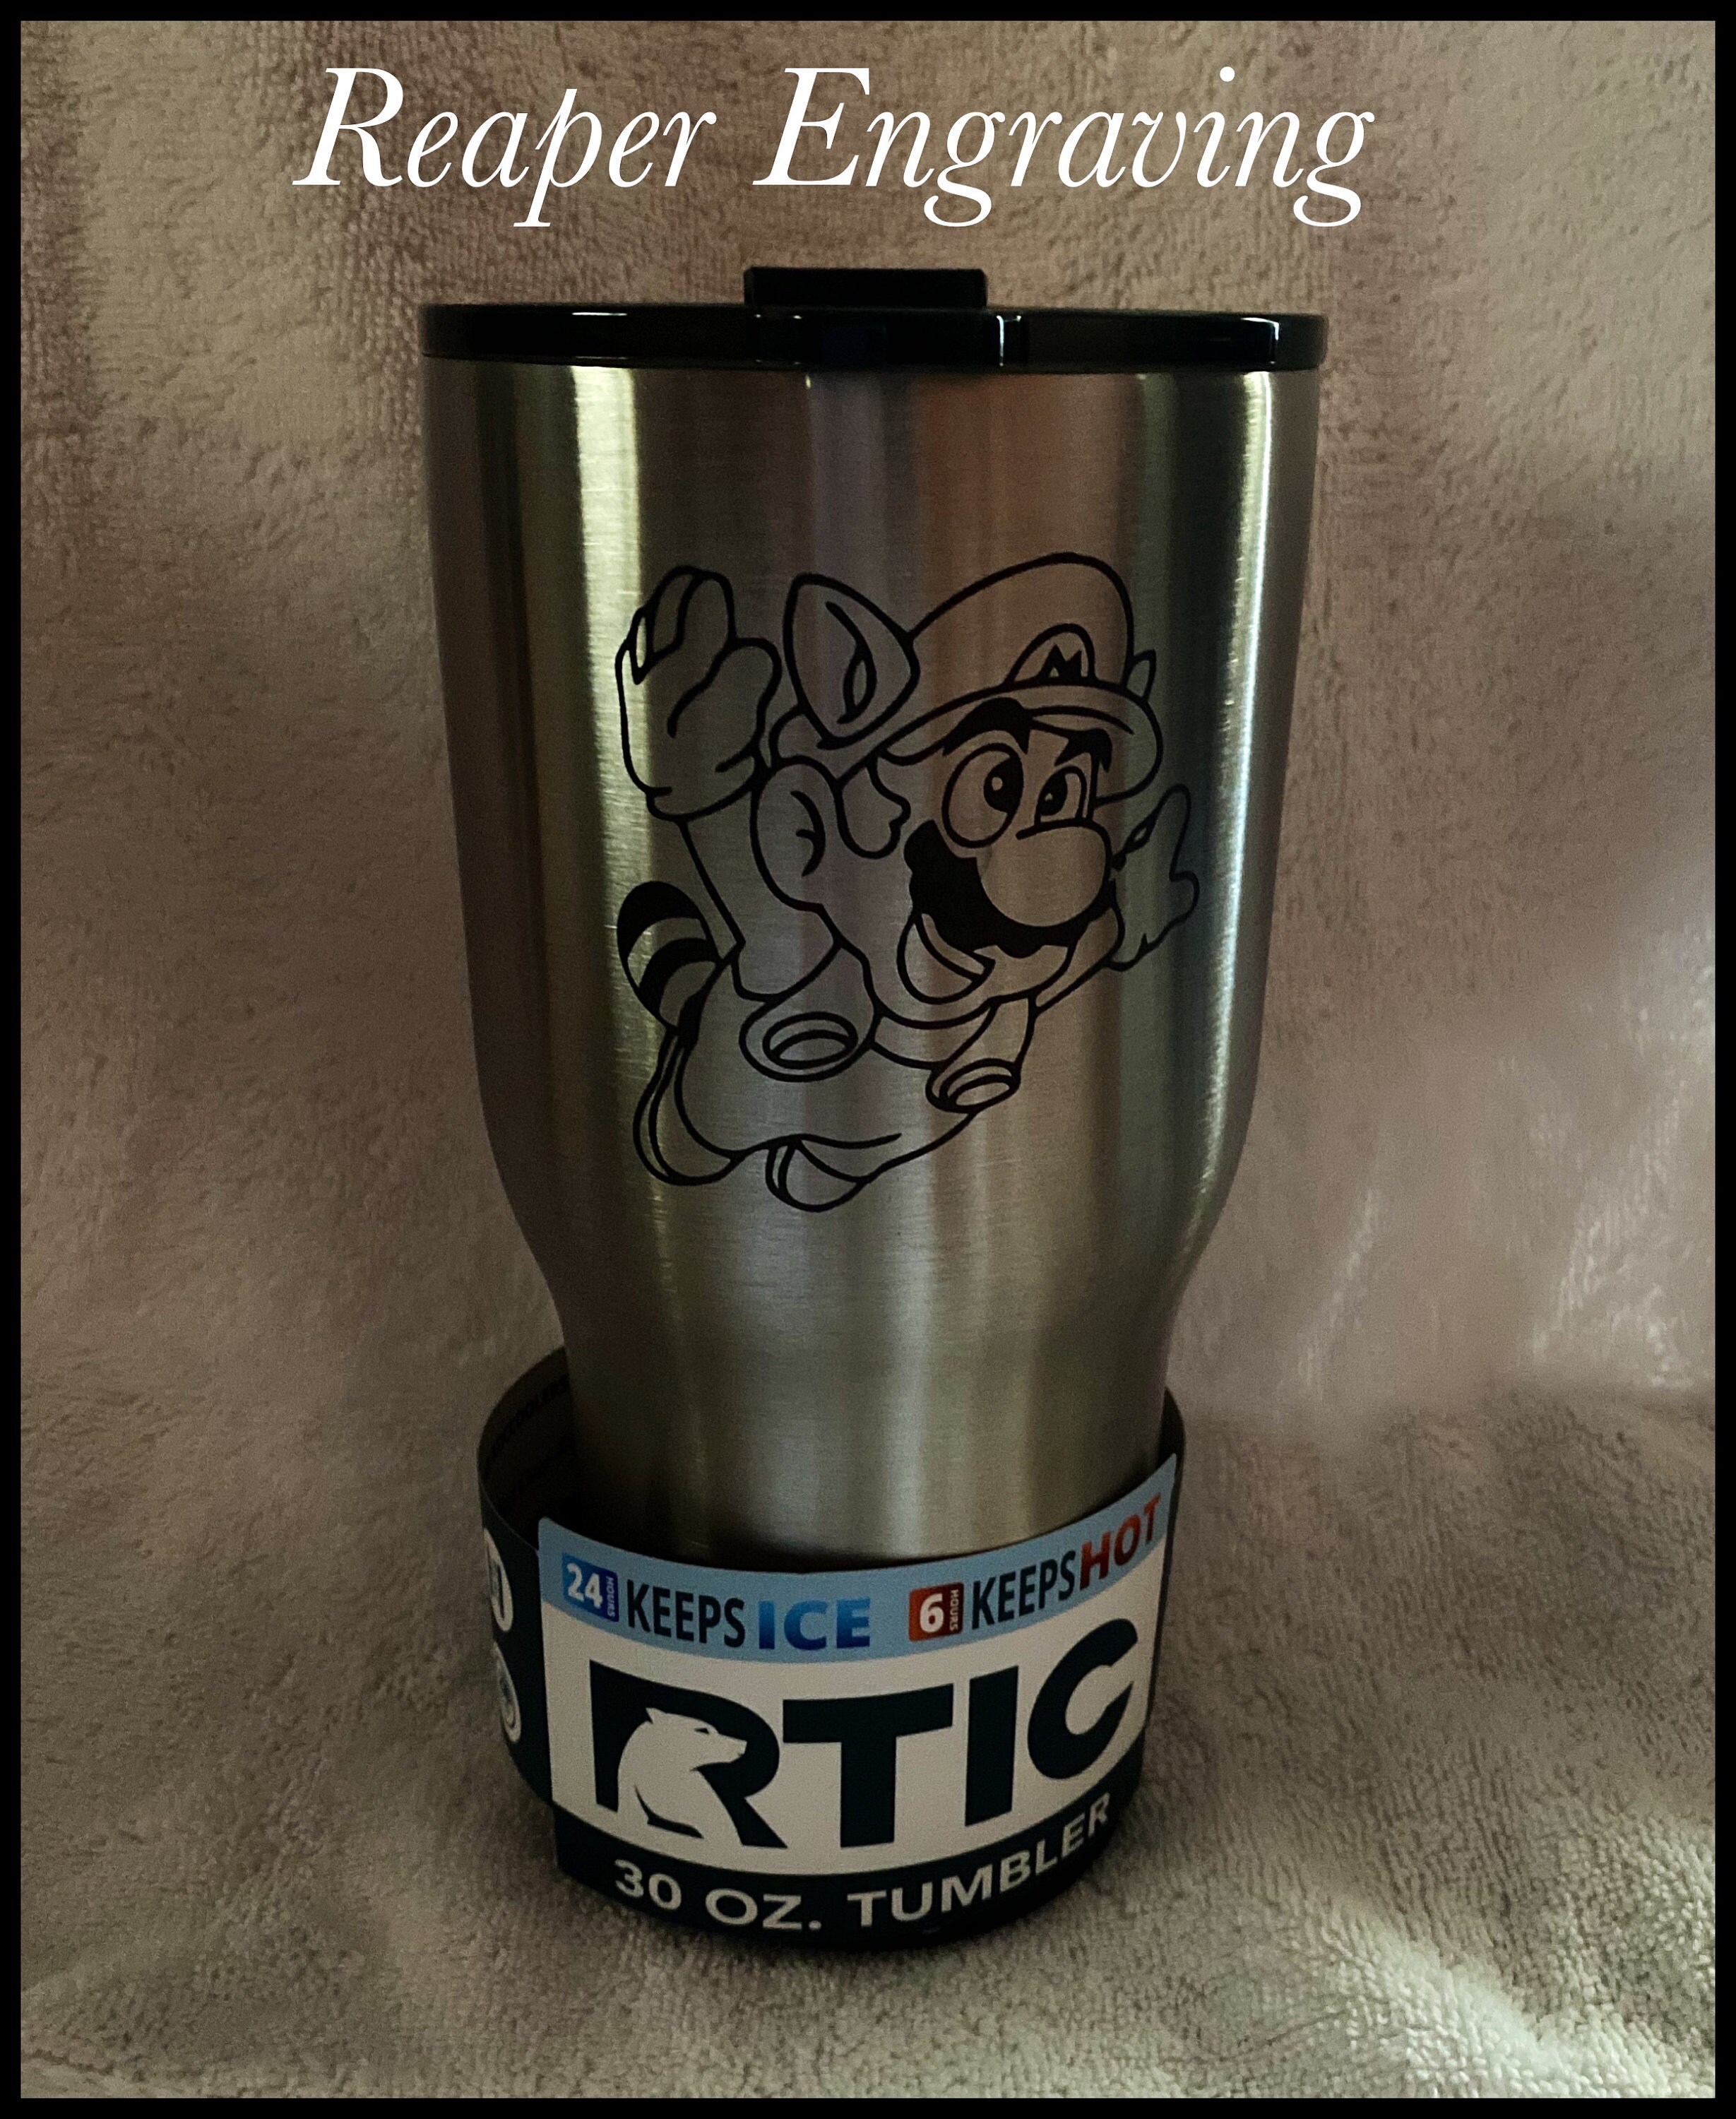 40 Oz. RTIC TUMBLER Personalized With Laser Engraved Name Phrase